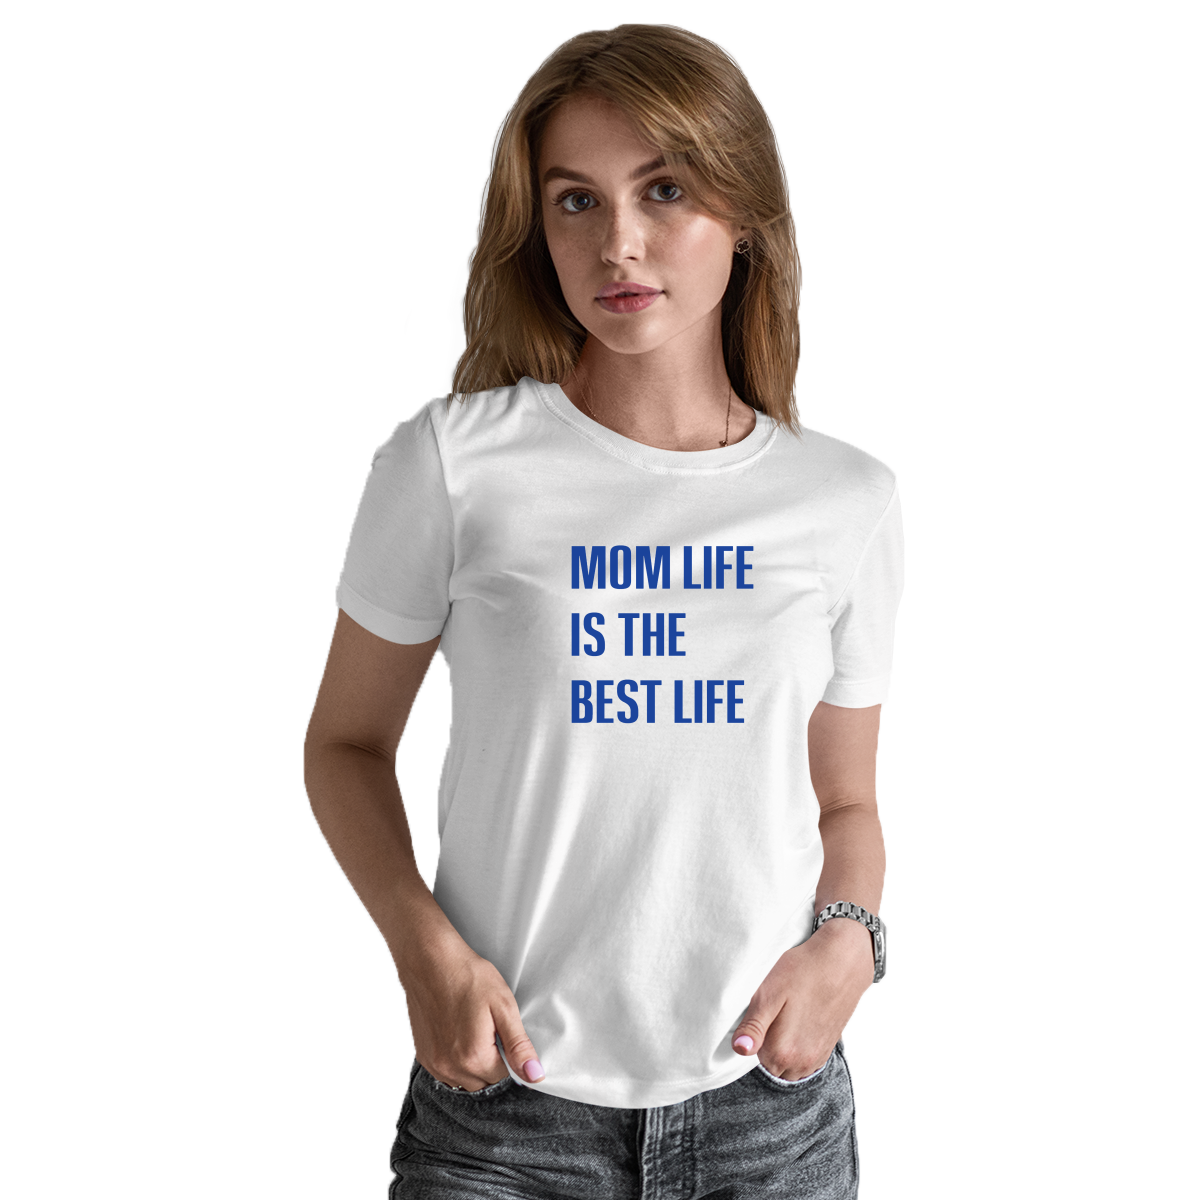 Mom Life is The Best Life Women's T-shirt | White